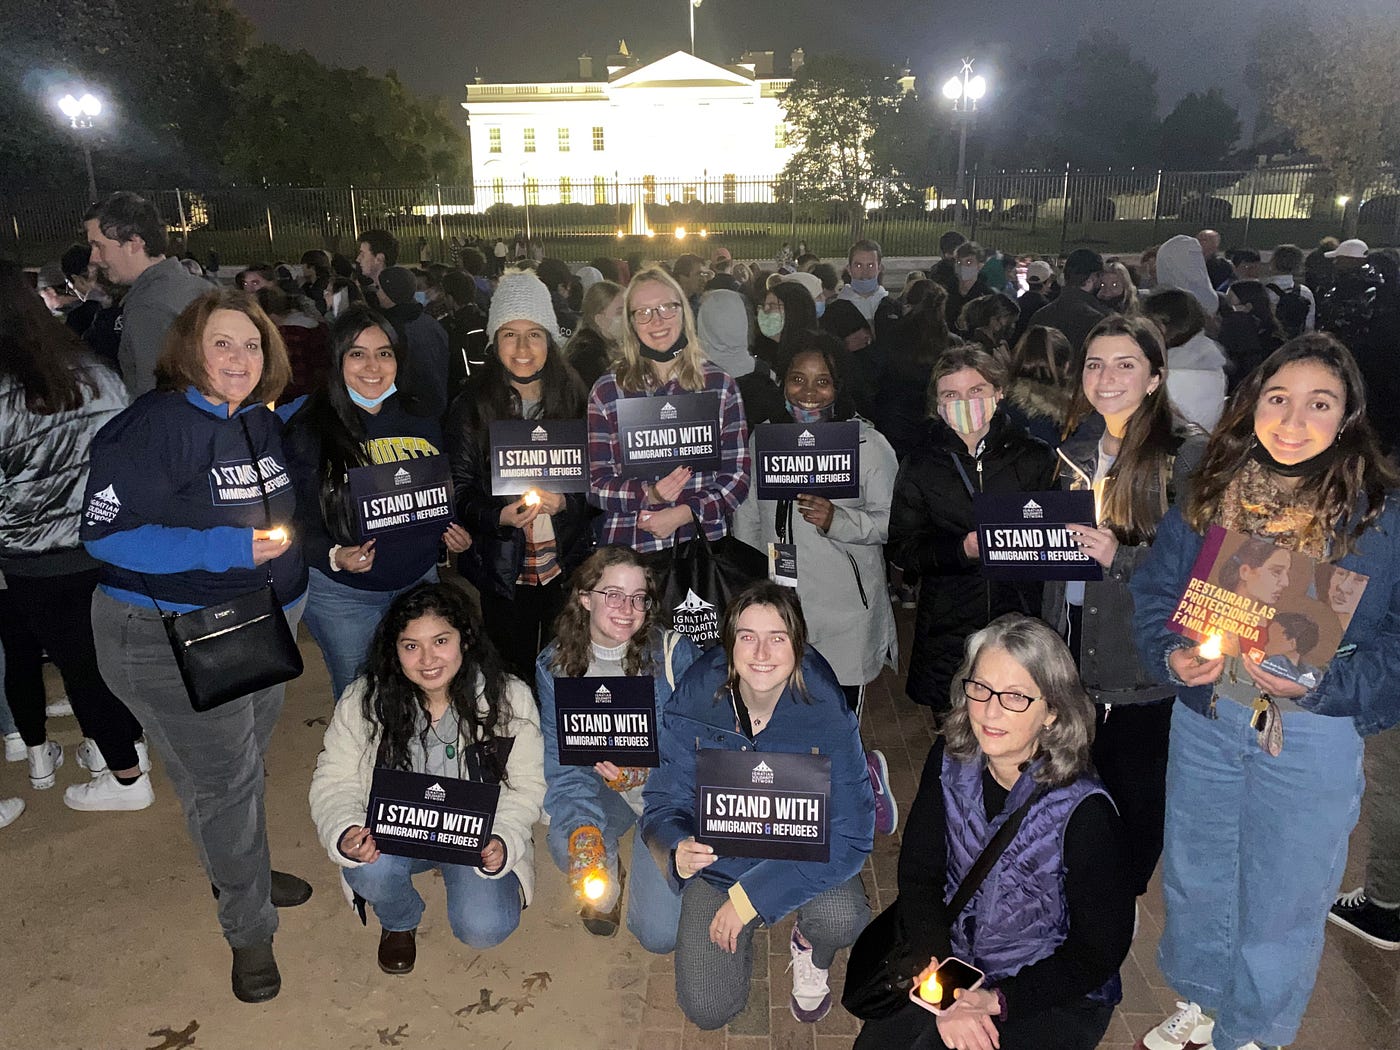 The Delegation of Marquette in front of the White House at a vigil asking for the repeal of Title 42: the health action closing the borders to lawful asylum seekers.